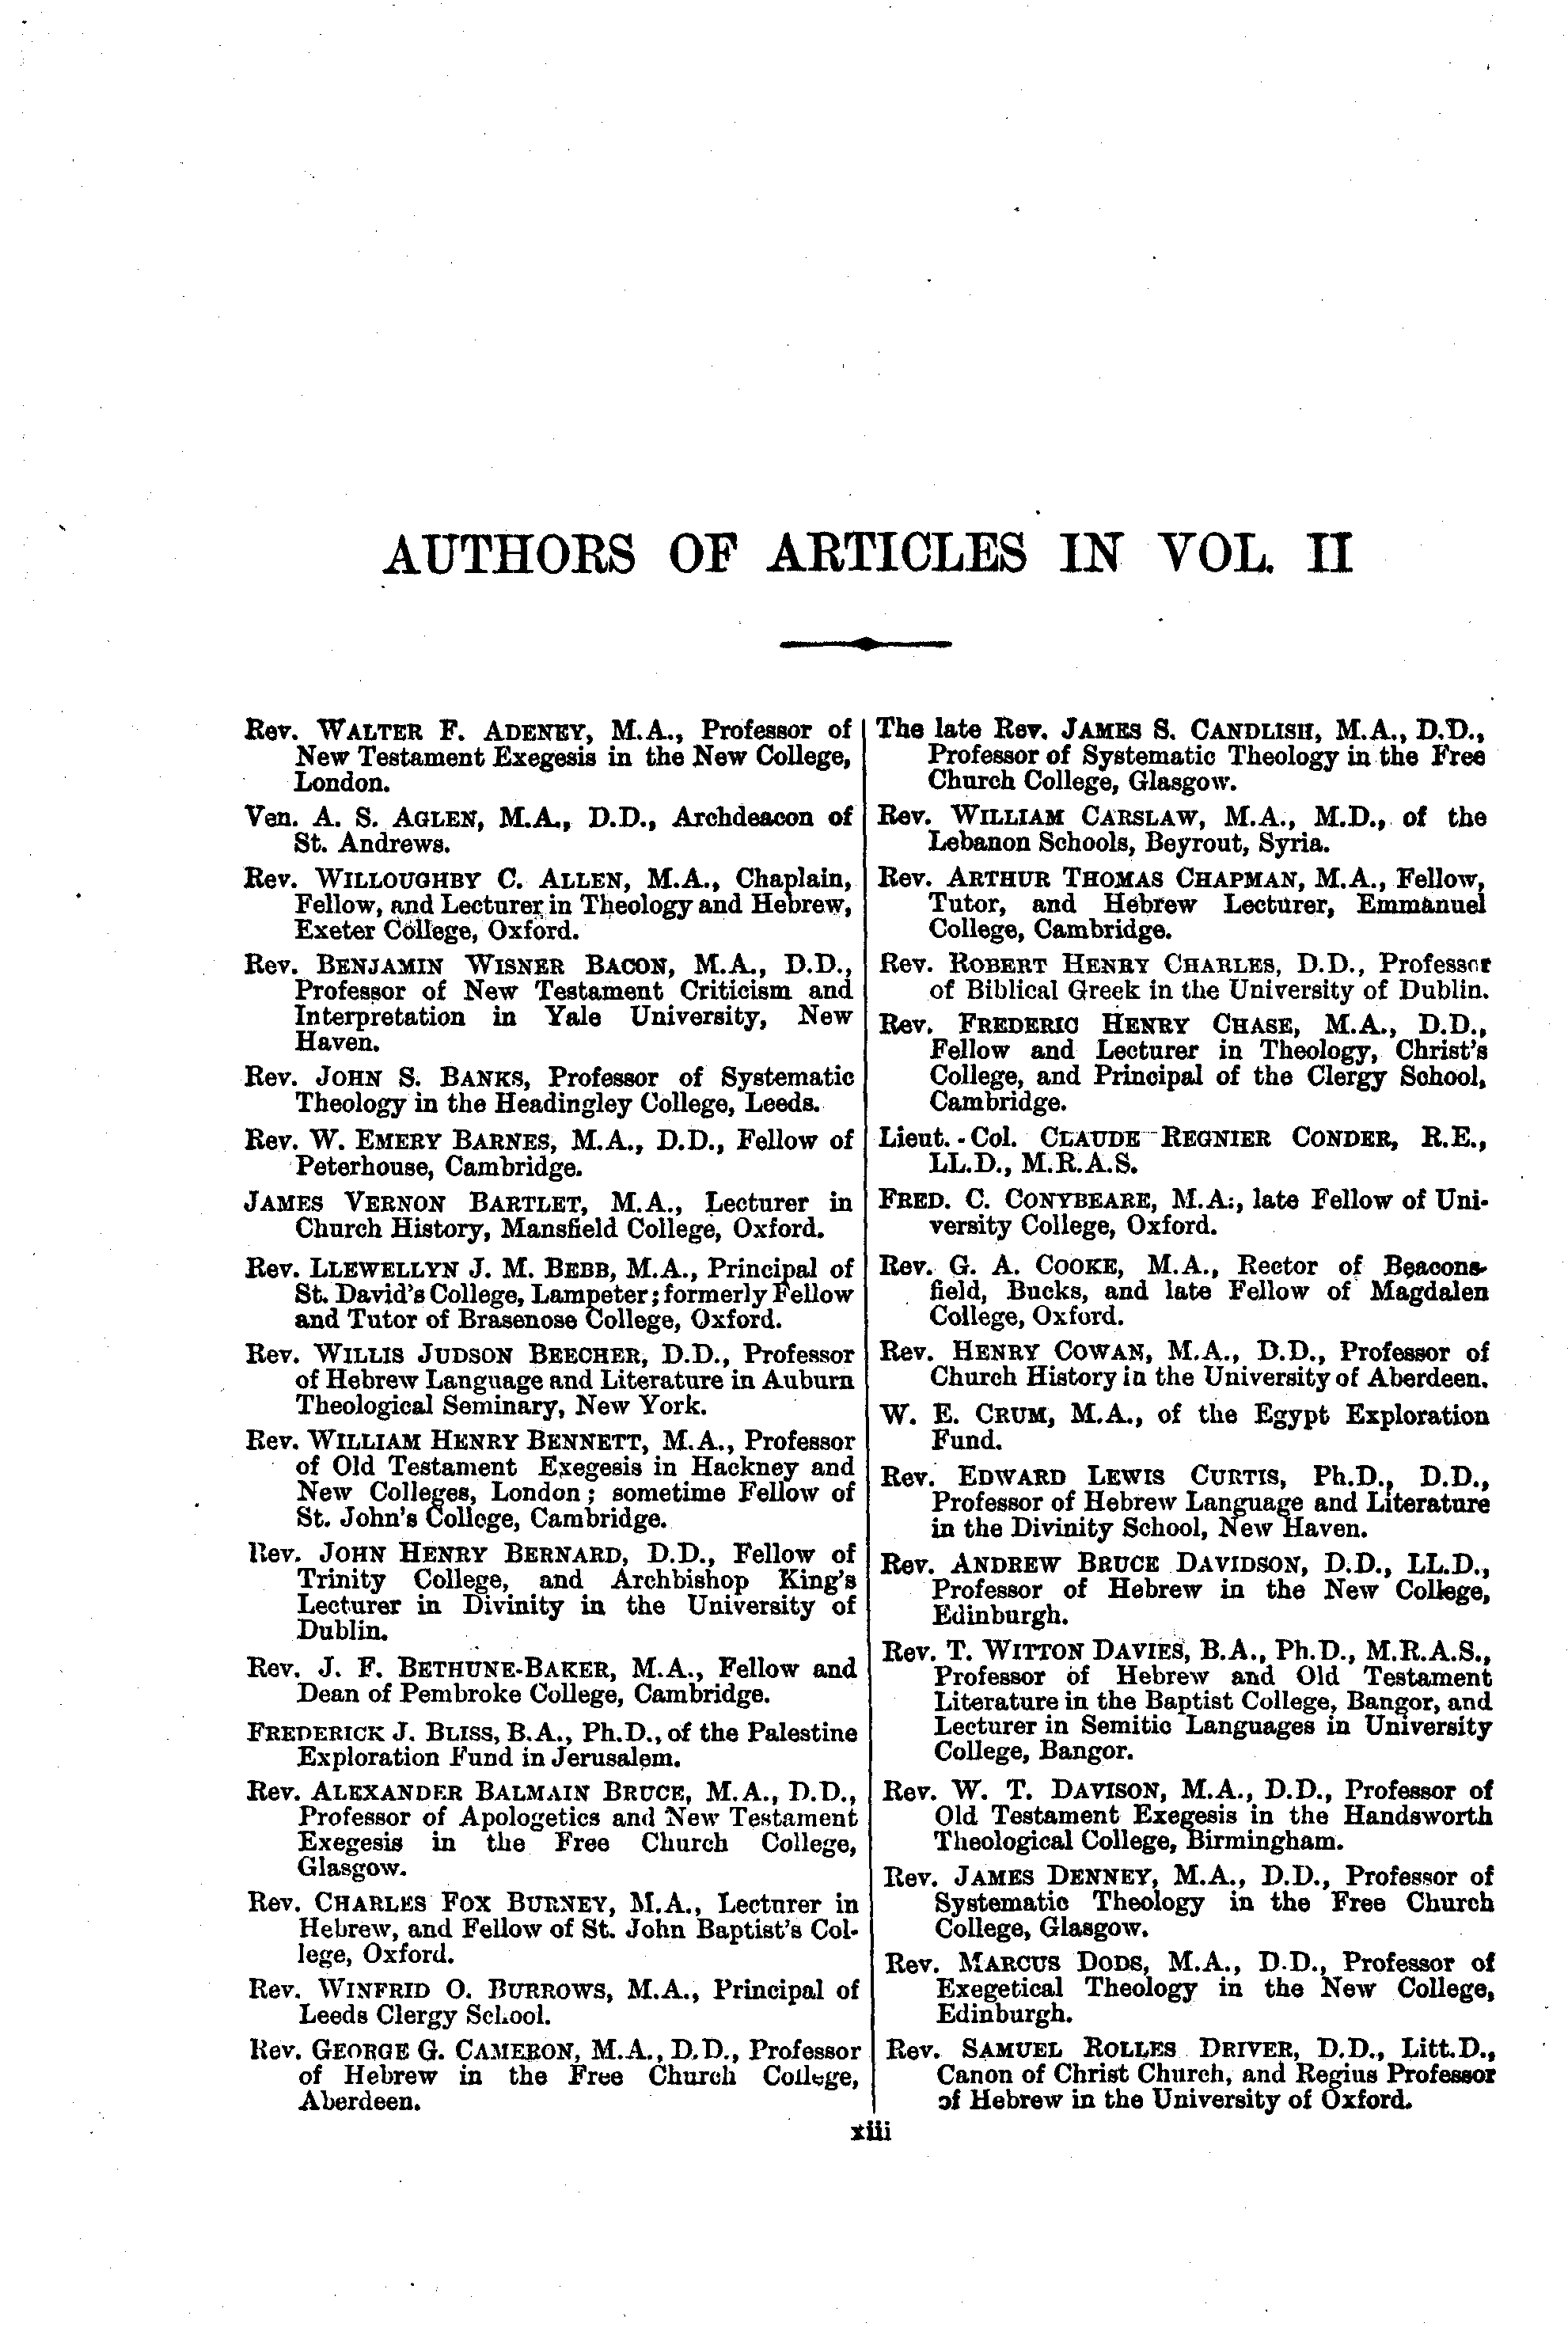 Image of page xiii